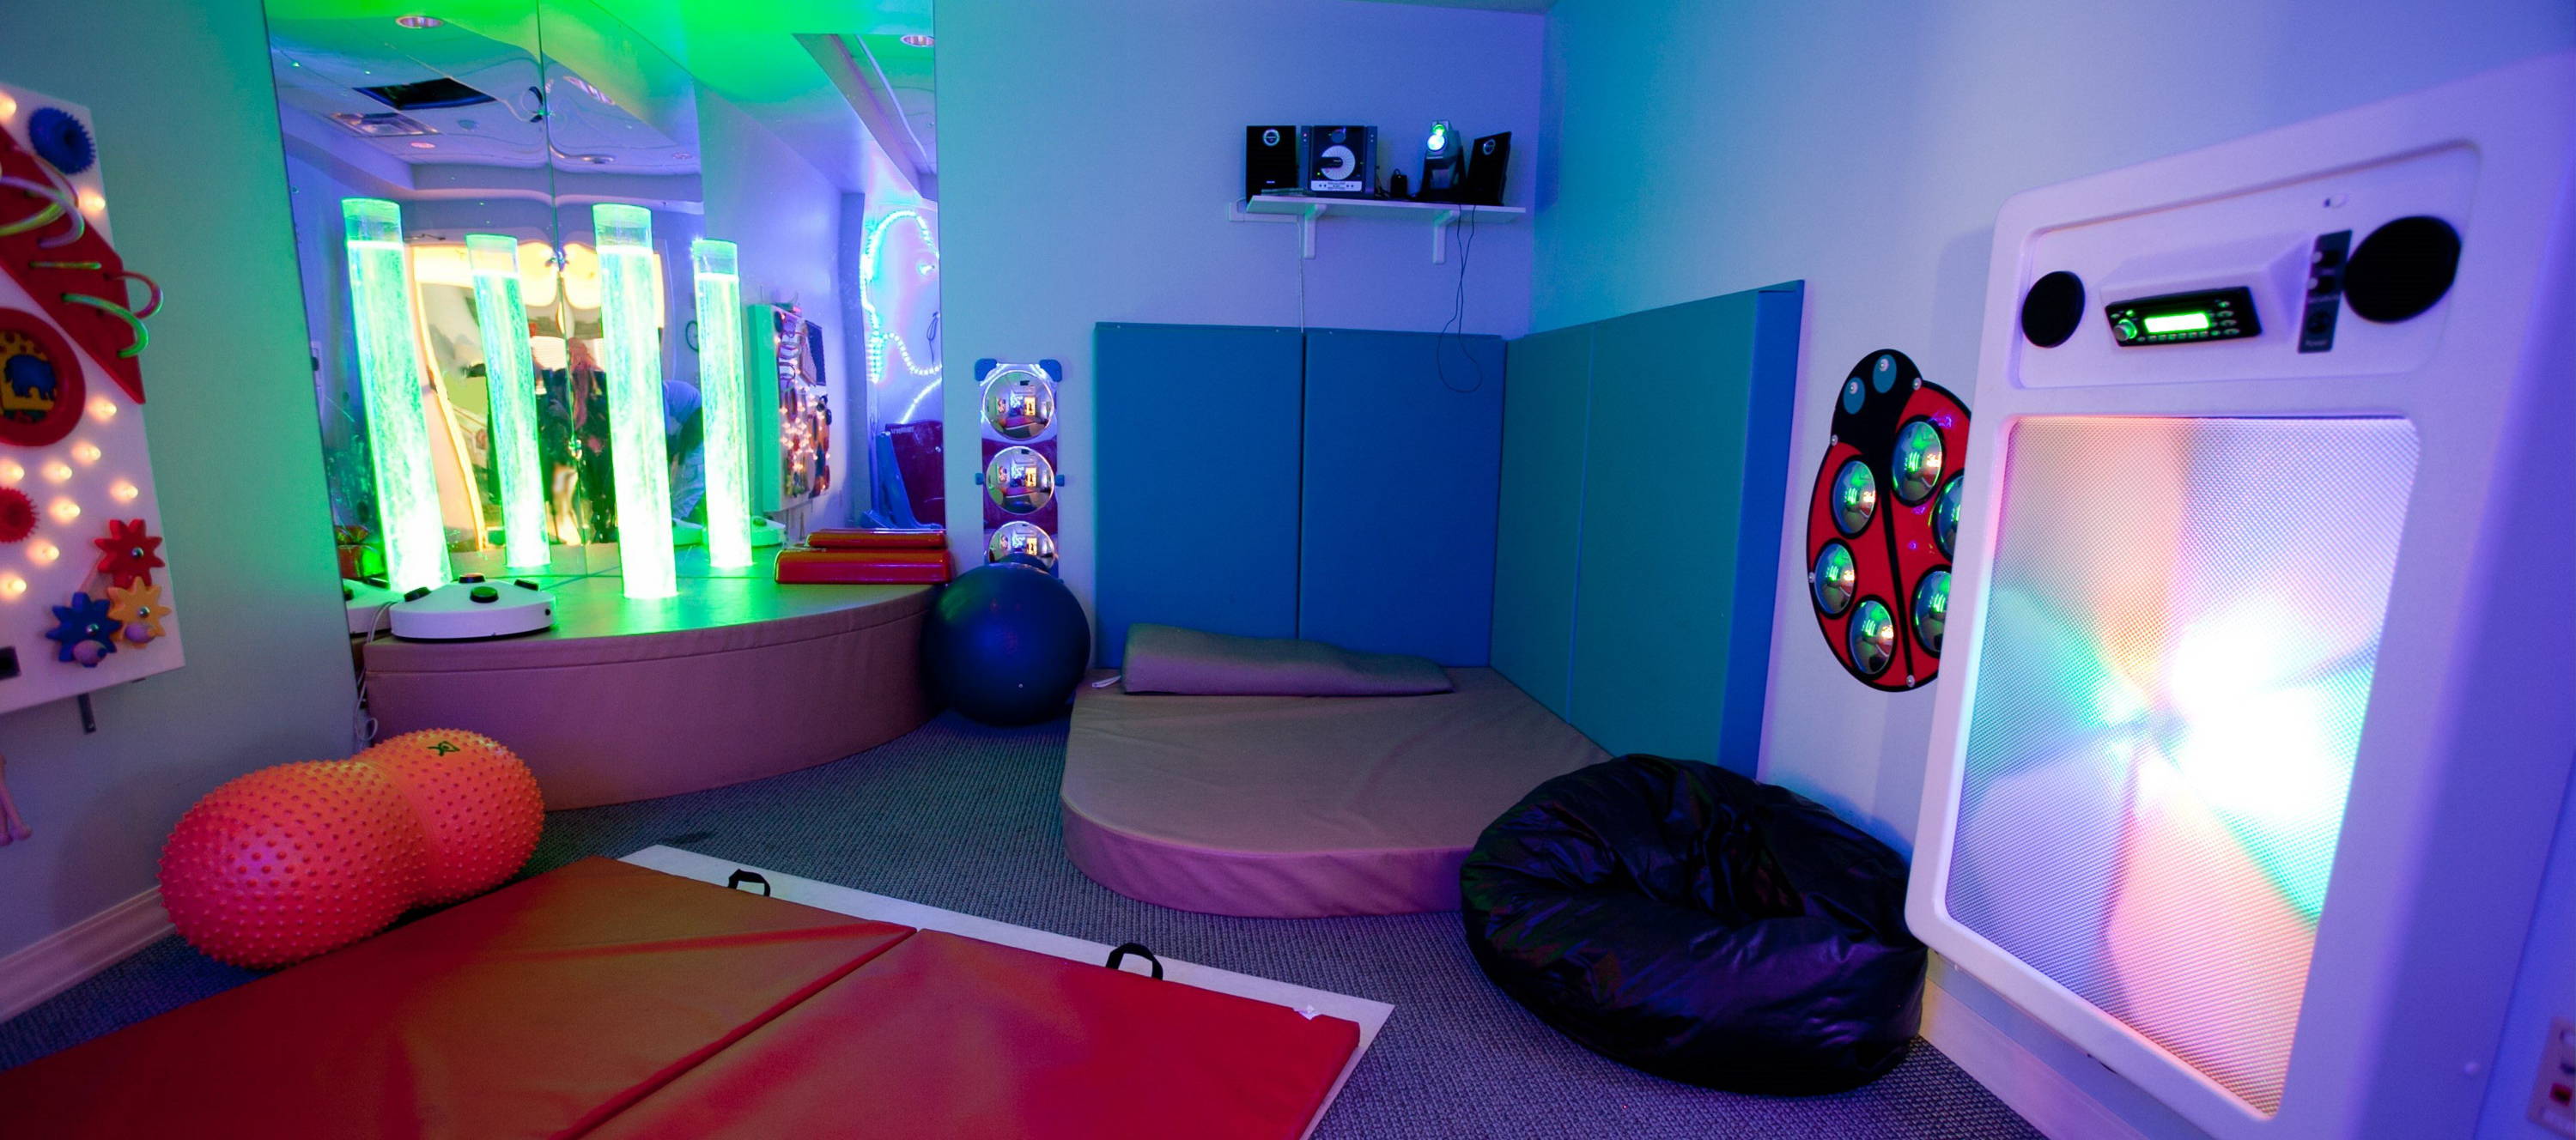 Benefits of Sensory Rooms & Spaces in Schools and Homes